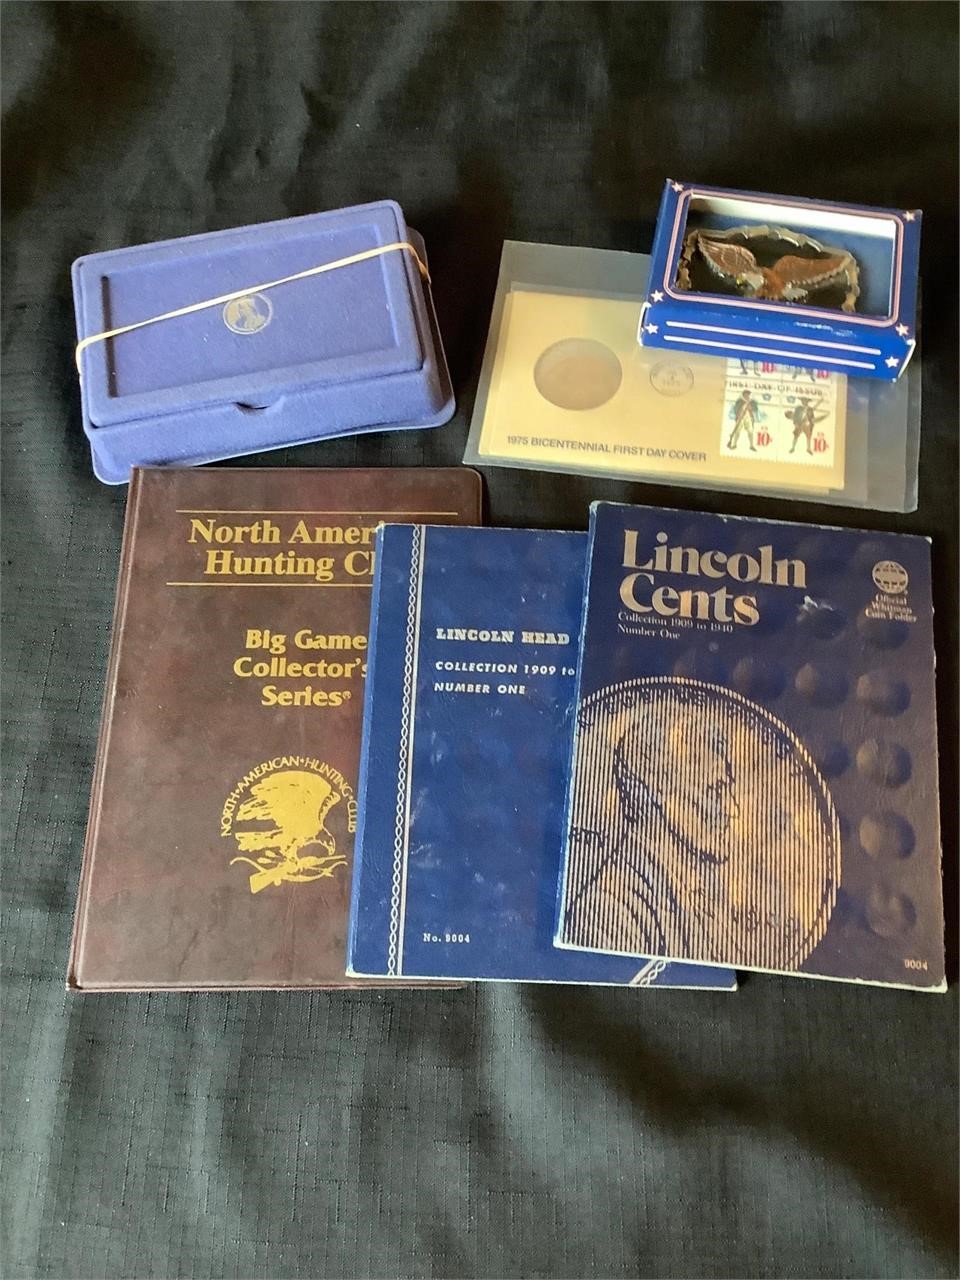 The Franklin Mint Seal, New Belt Buckle and Coins